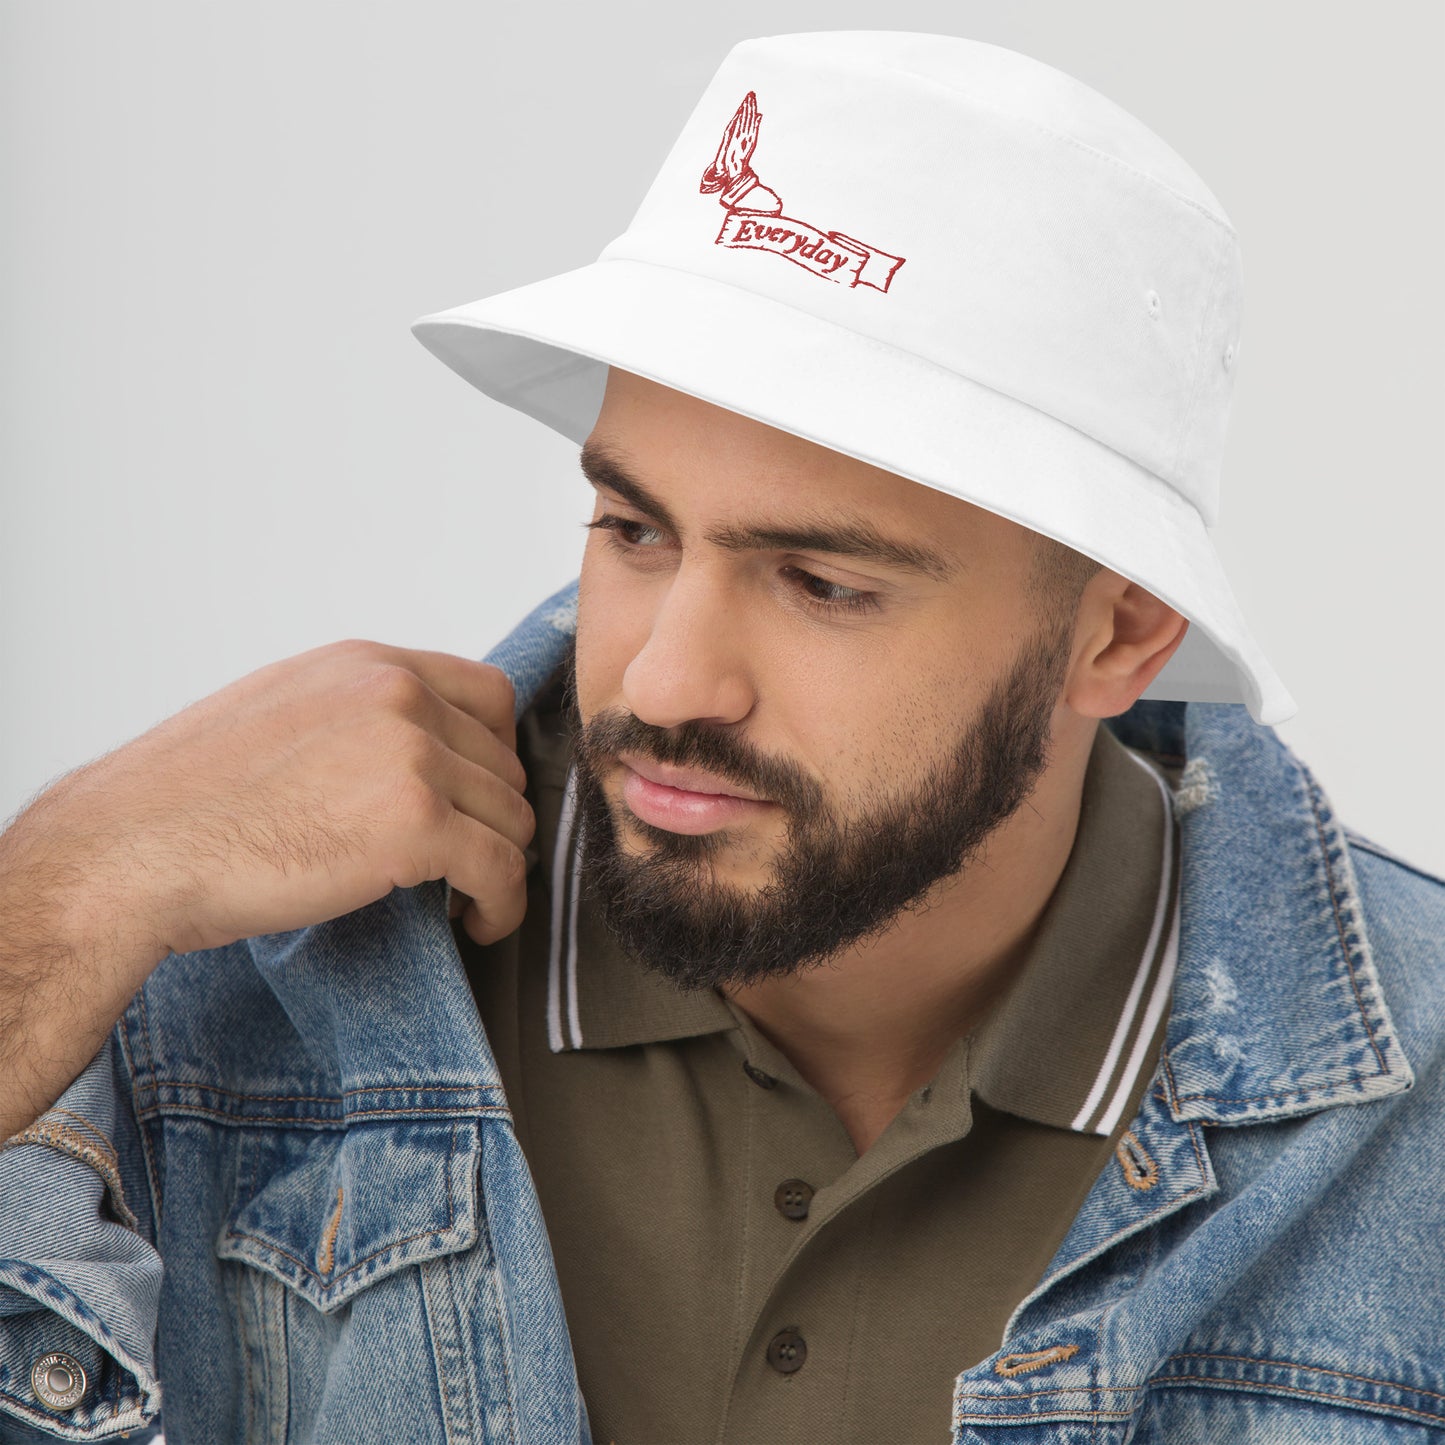 Show Your Faith in Style: Pray Everyday Bucket Hat (Unisex)